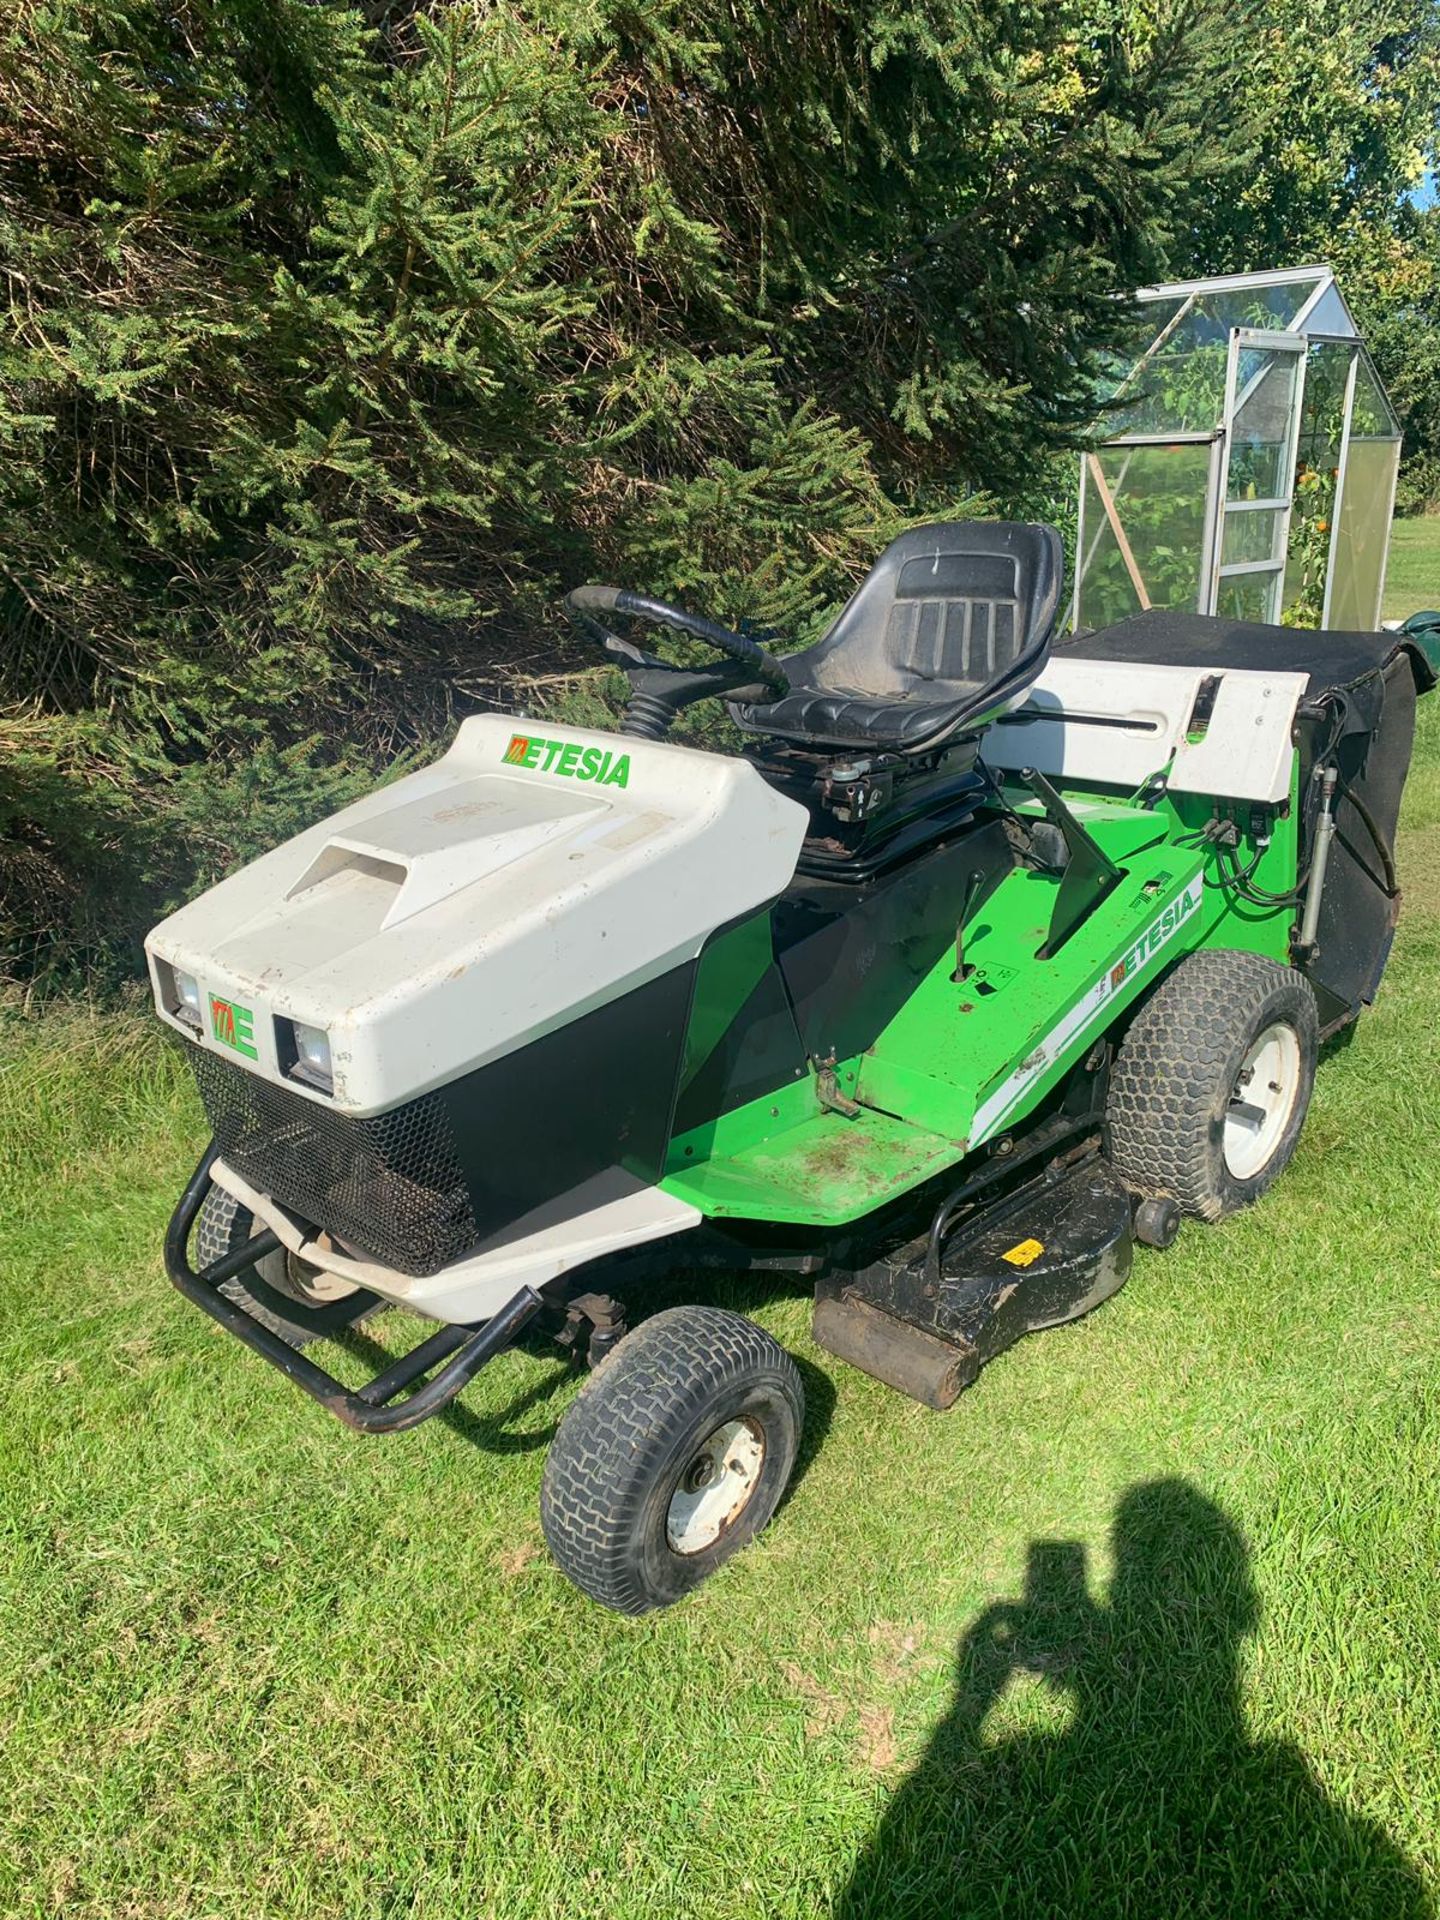 ETESIA MVEHH HYDRO RIDE ON LAWN MOWER C/W REAR GRASS COLLECTOR, RUNS, WORKS AND CUTS *PLUS VAT* - Image 4 of 16